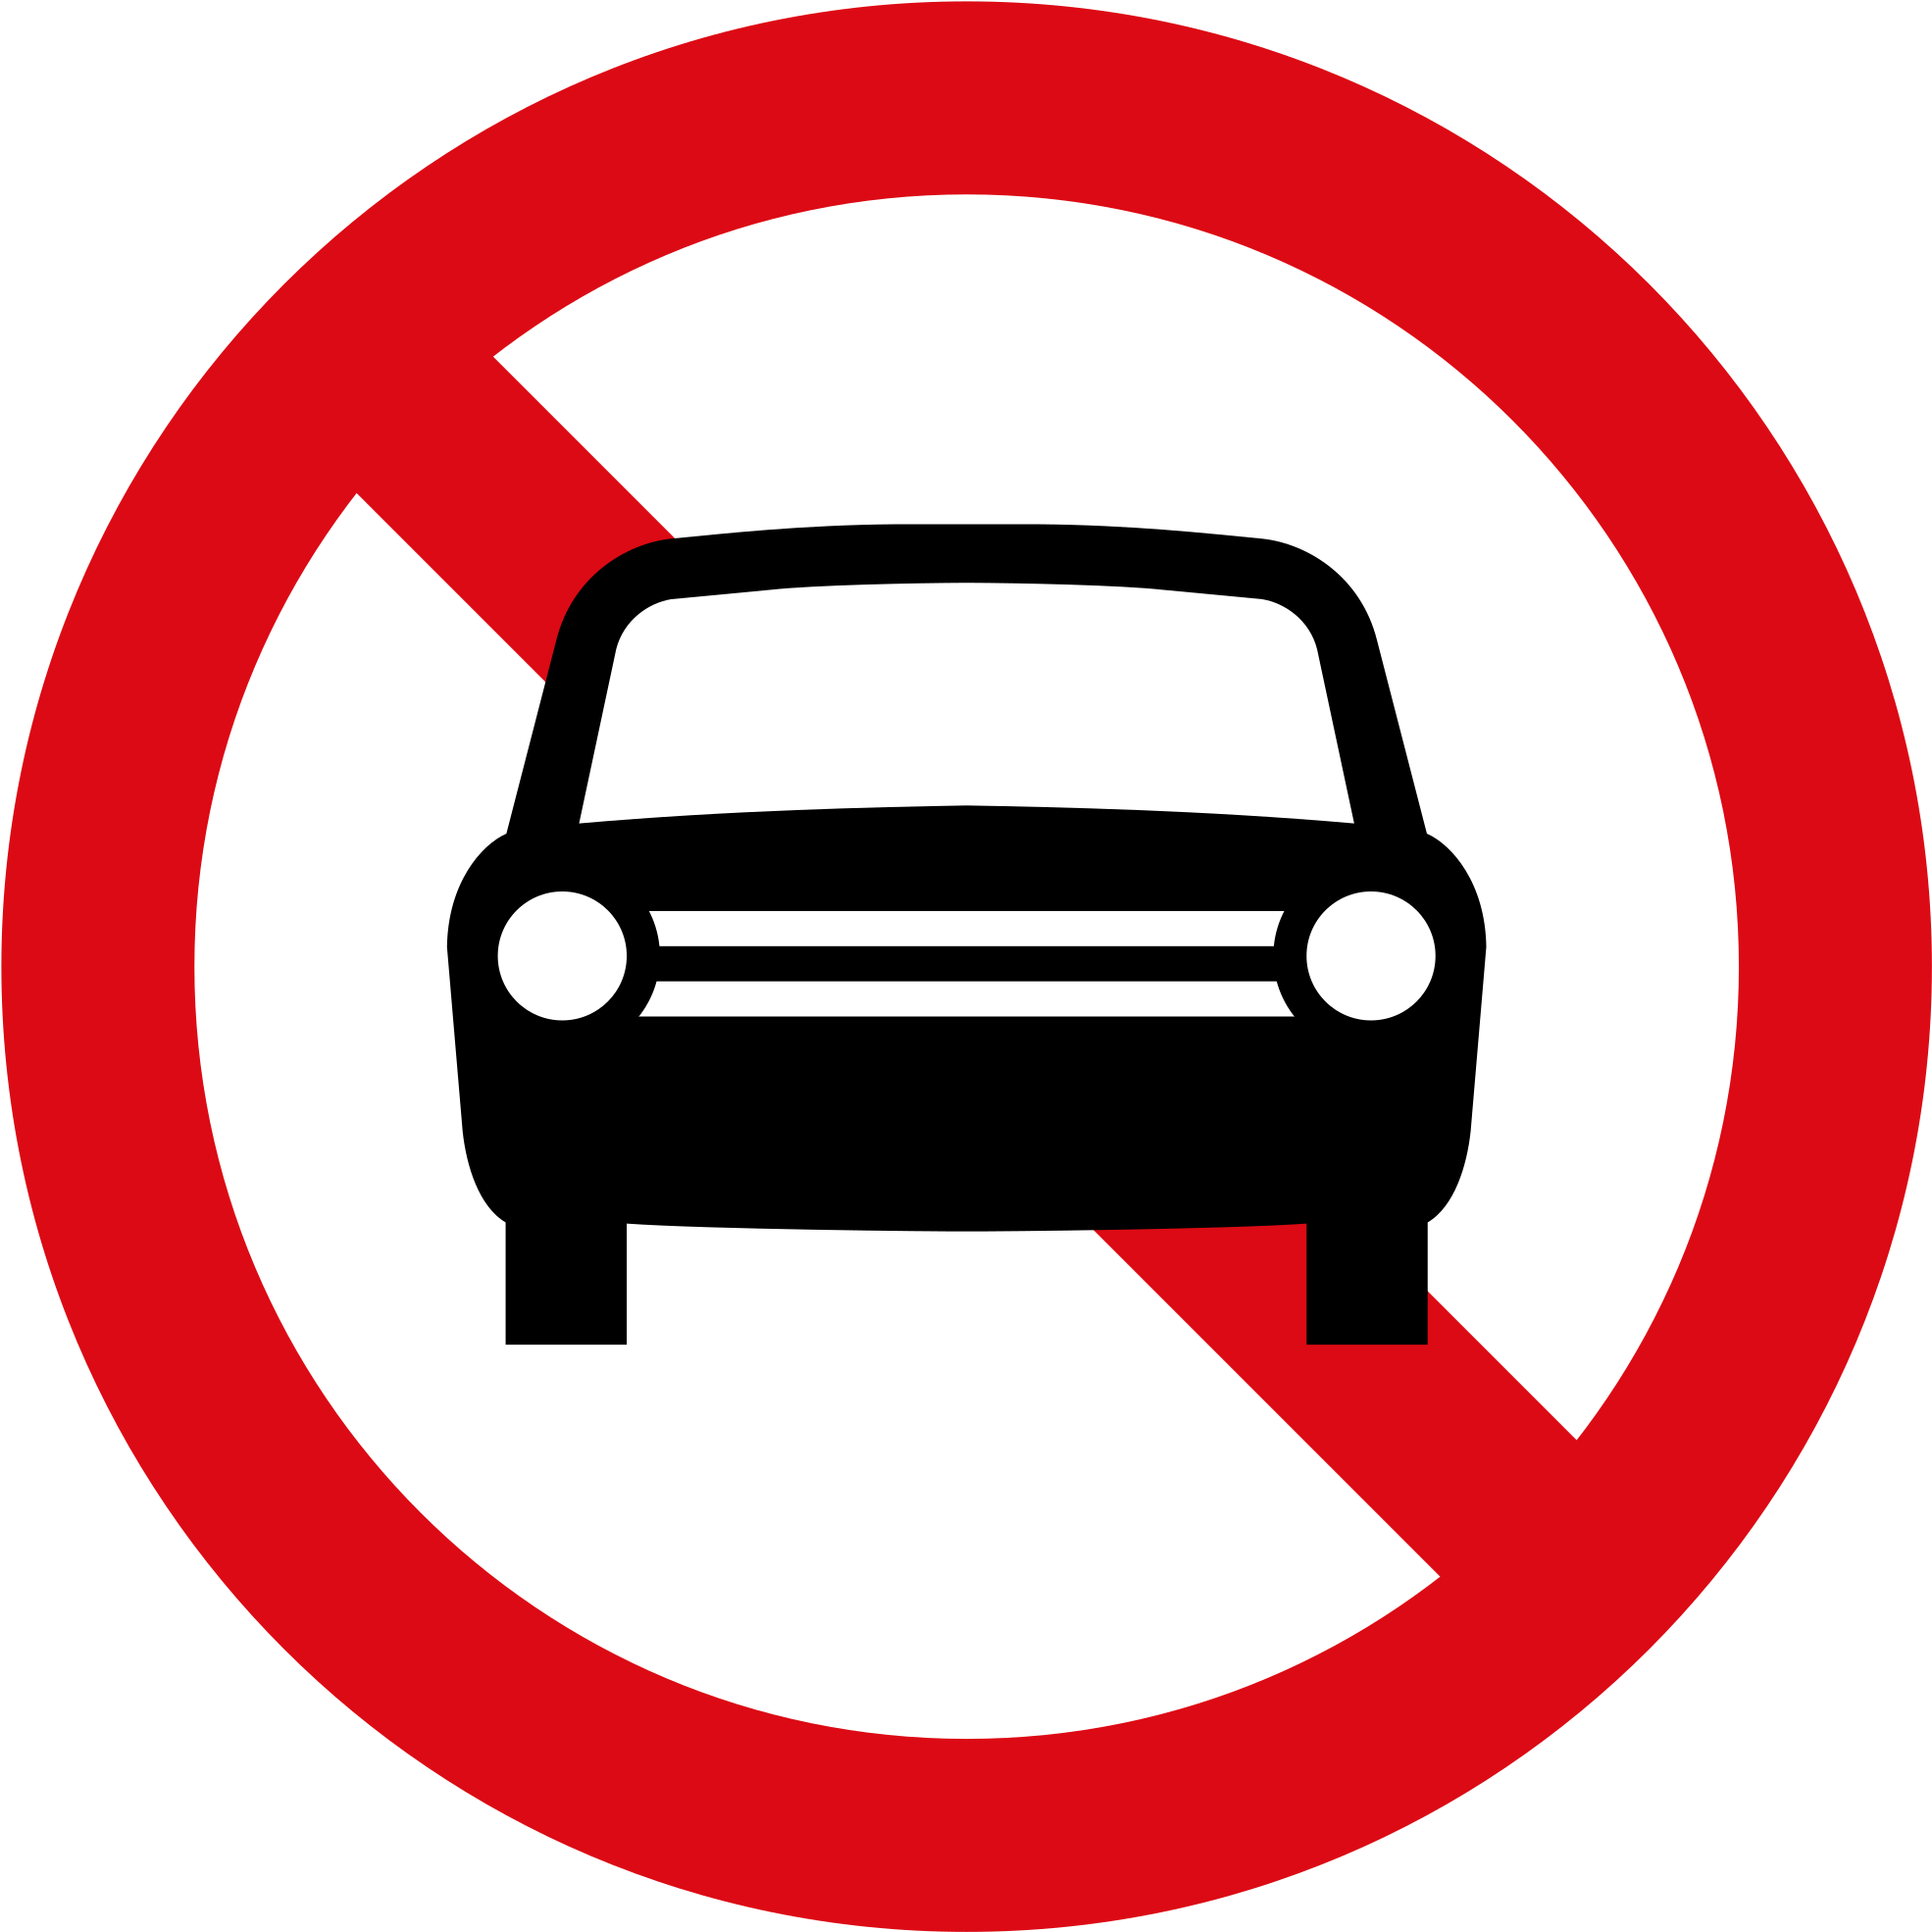 Open - No Entry For Vehicles Sign (2000x2000)